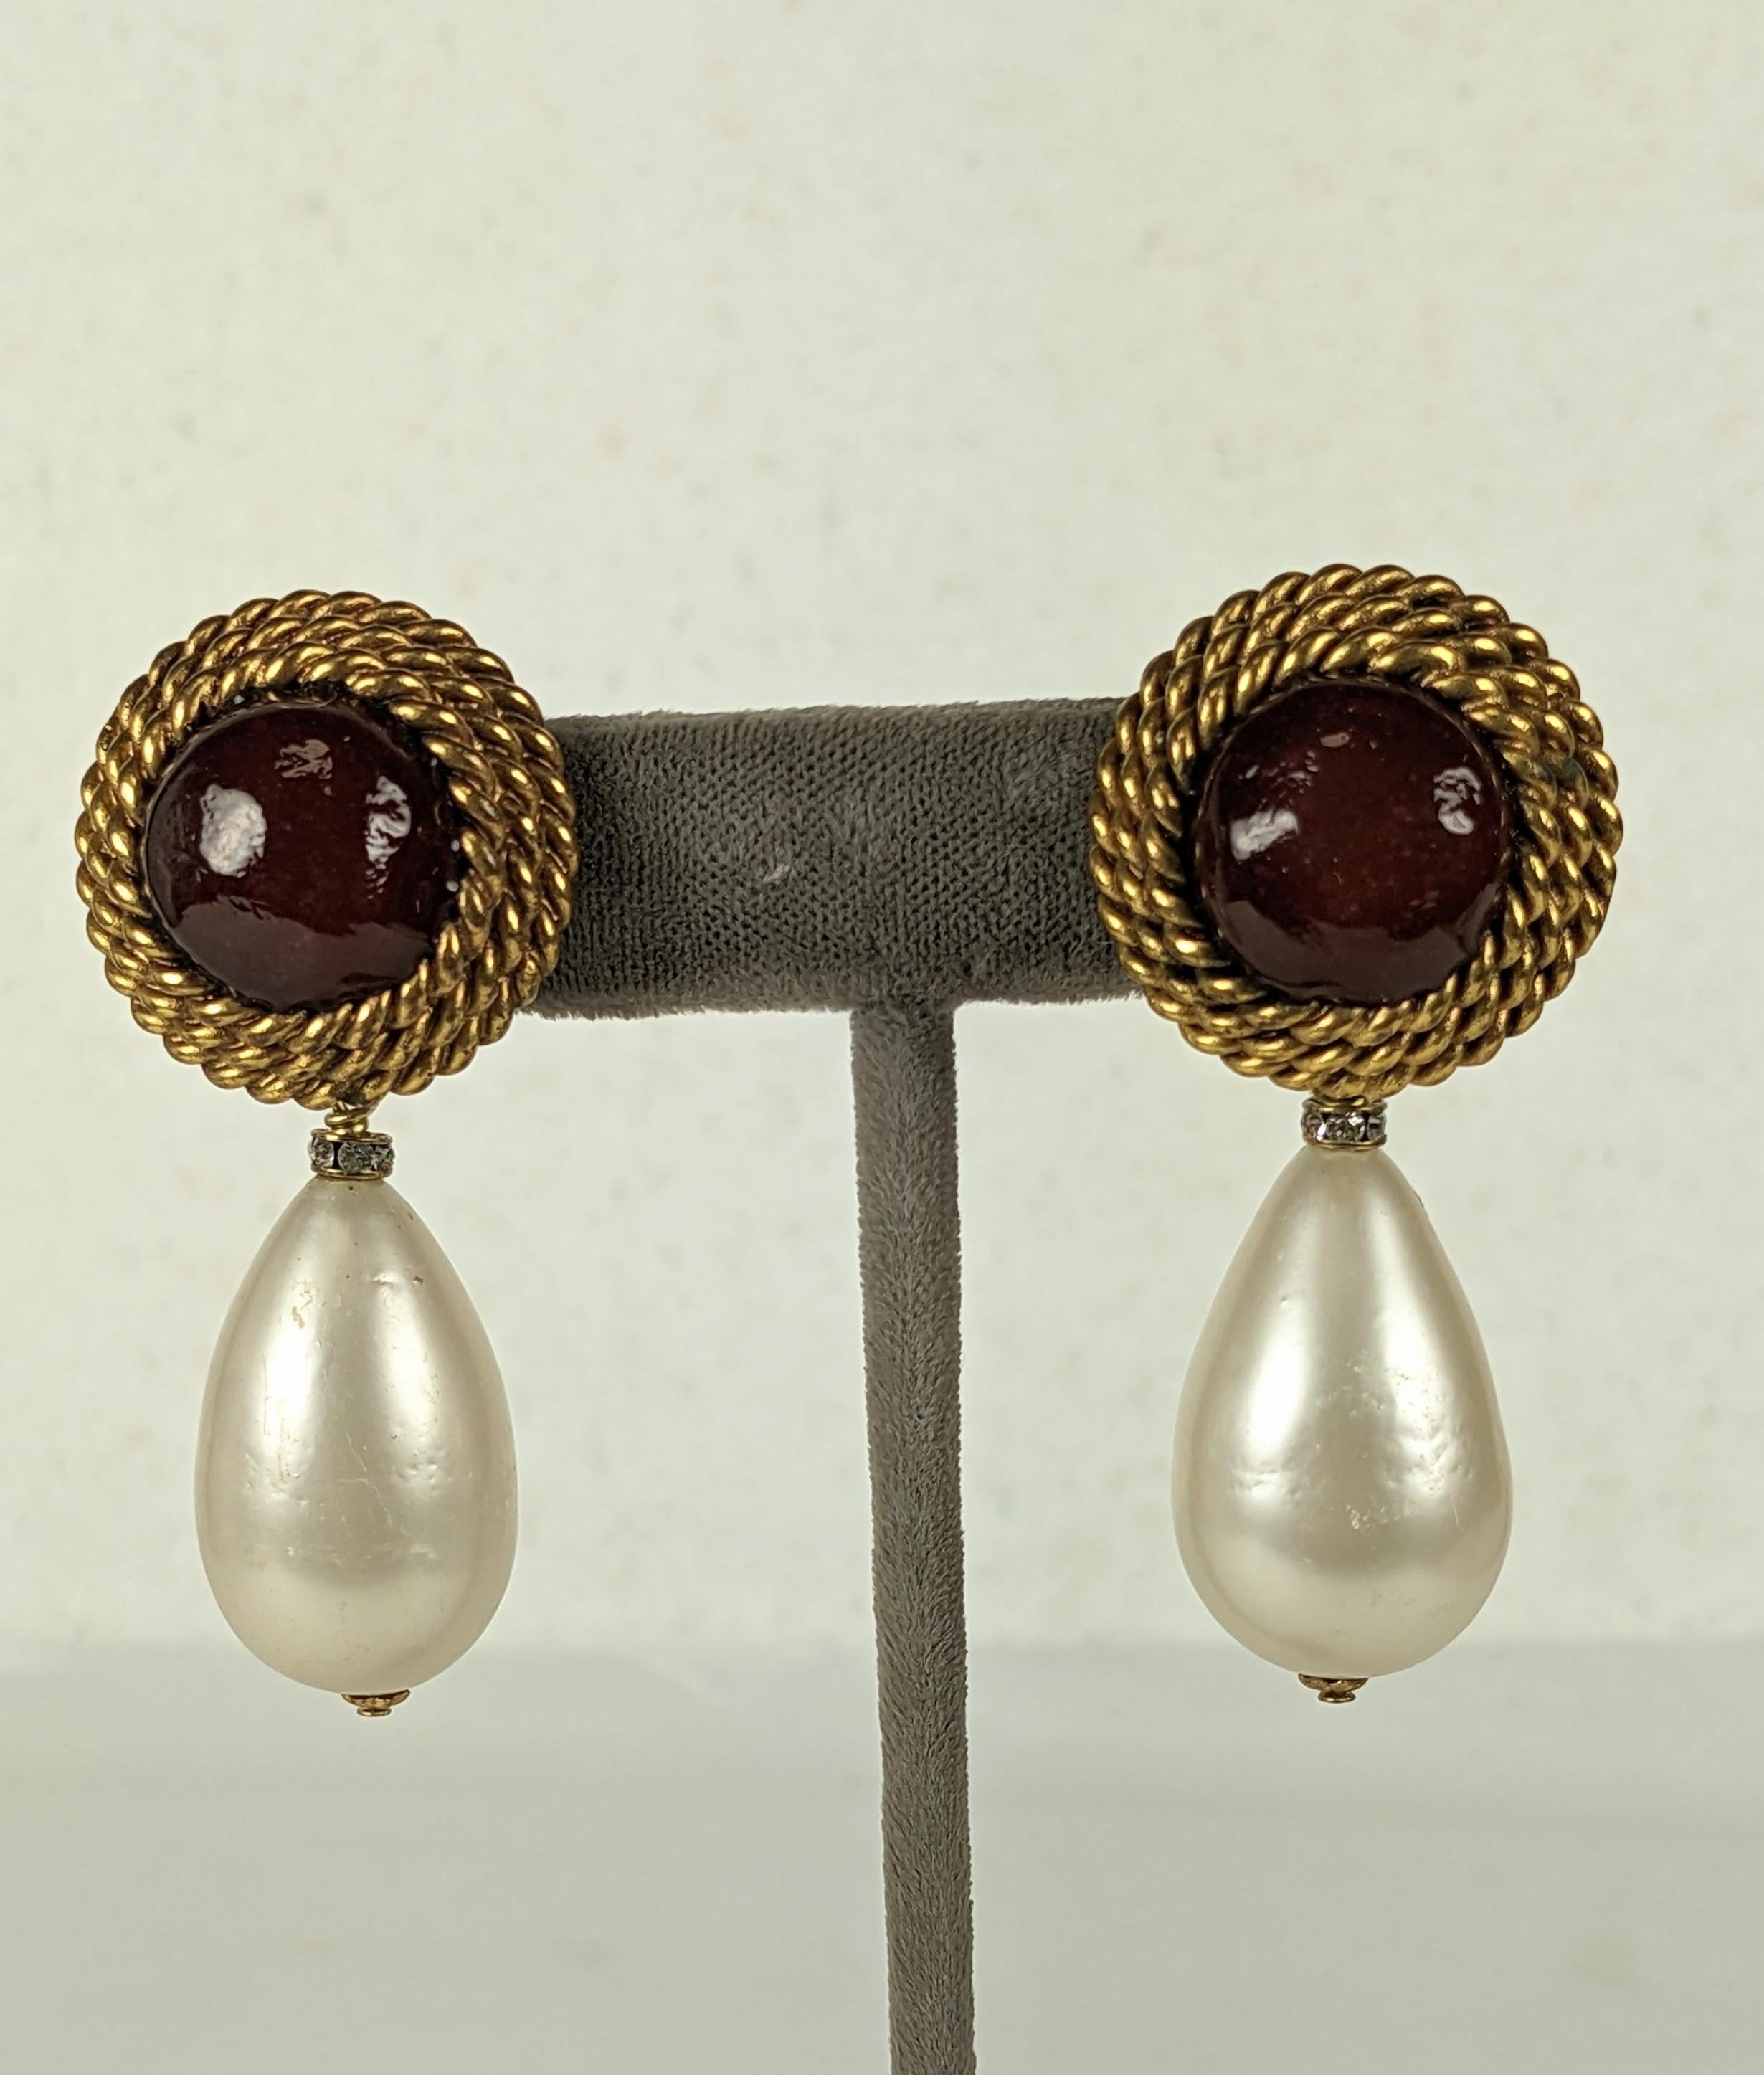 Classic Elegant Chanel Maison Gripoix Ruby Pate de Verre and Faux Pearl Earrings from the 1980's. Handmade by Maison Gripoix in gilt bronze twisted wire with ruby poured glass and large handmade pearl drop with pave rondel cap. Made during the Karl